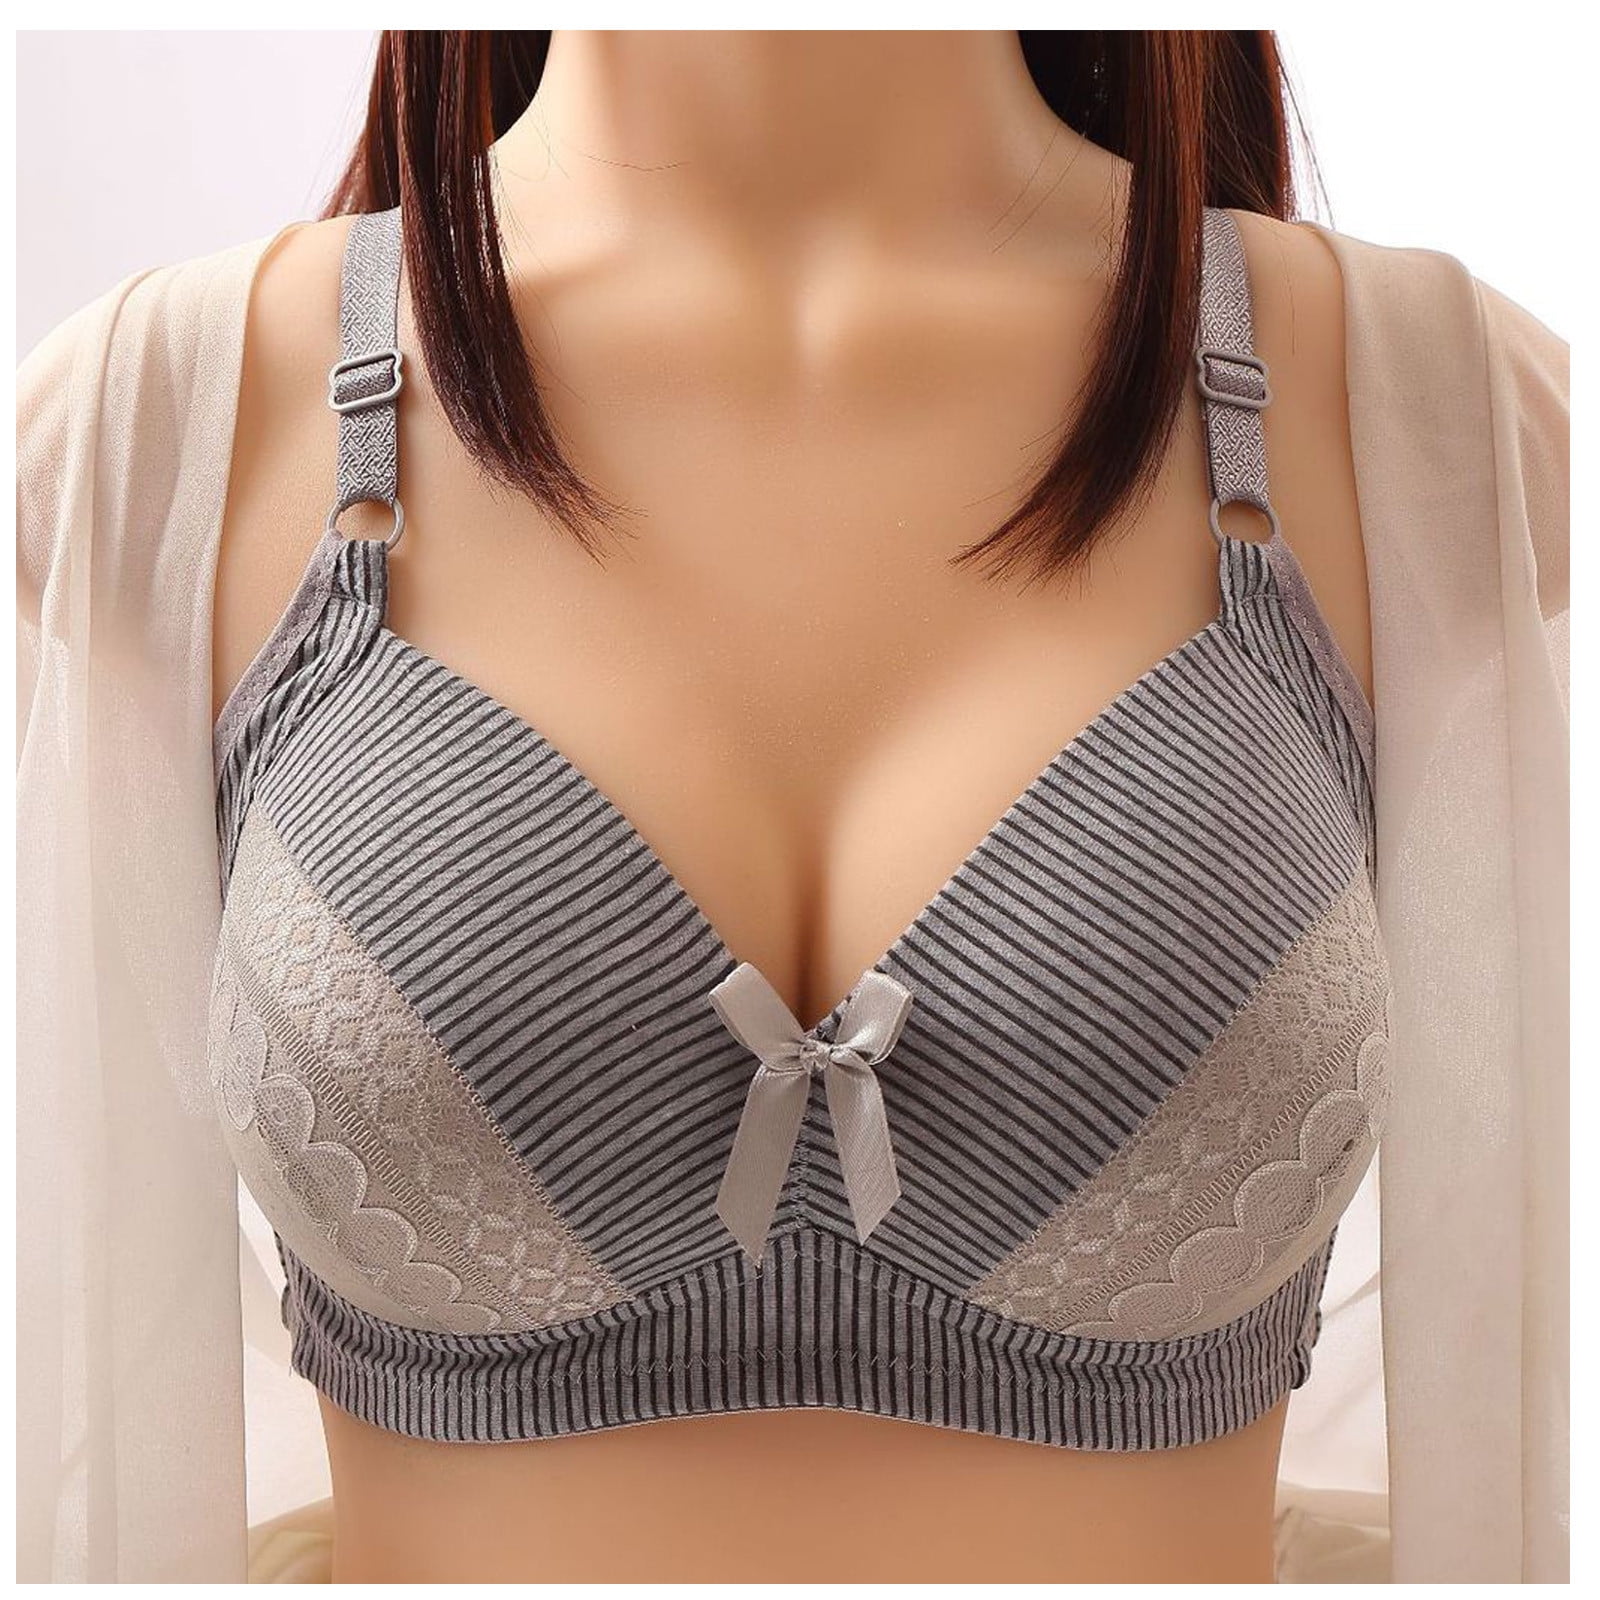 Danhjin Bras for Women Plus Size Bra No Steel Ring Push Up Underwear Vest-Style  Sleep Bra Bralettes for Women with Support - Summer Savings Clearance 